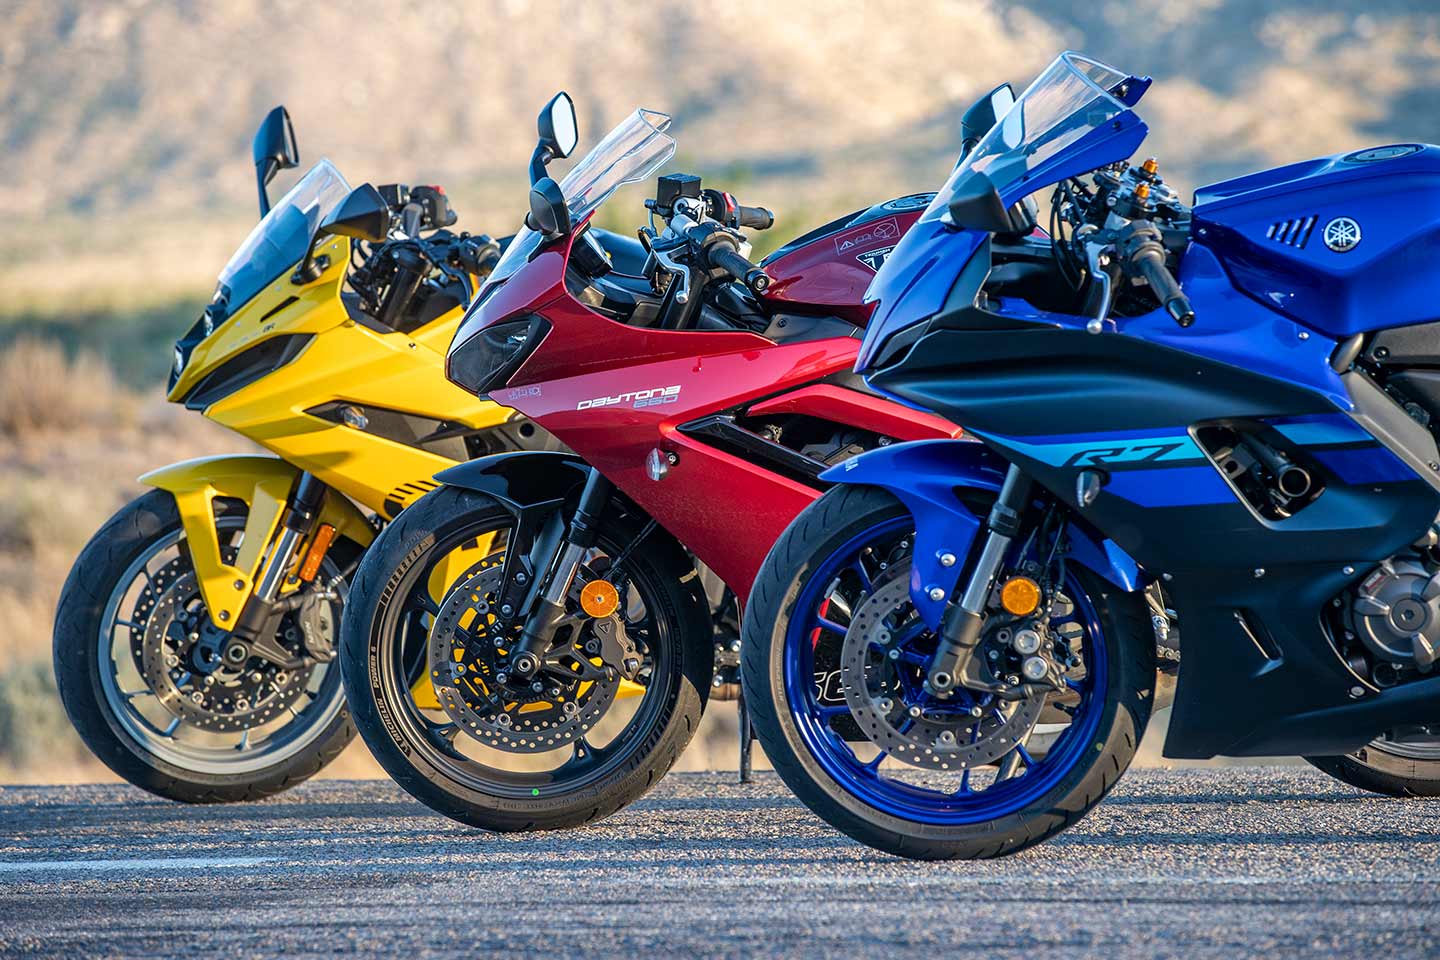 The braking packages on these three bikes all do their job well but in the interests of affordability aren’t the high-end systems found on track-focused supersports.